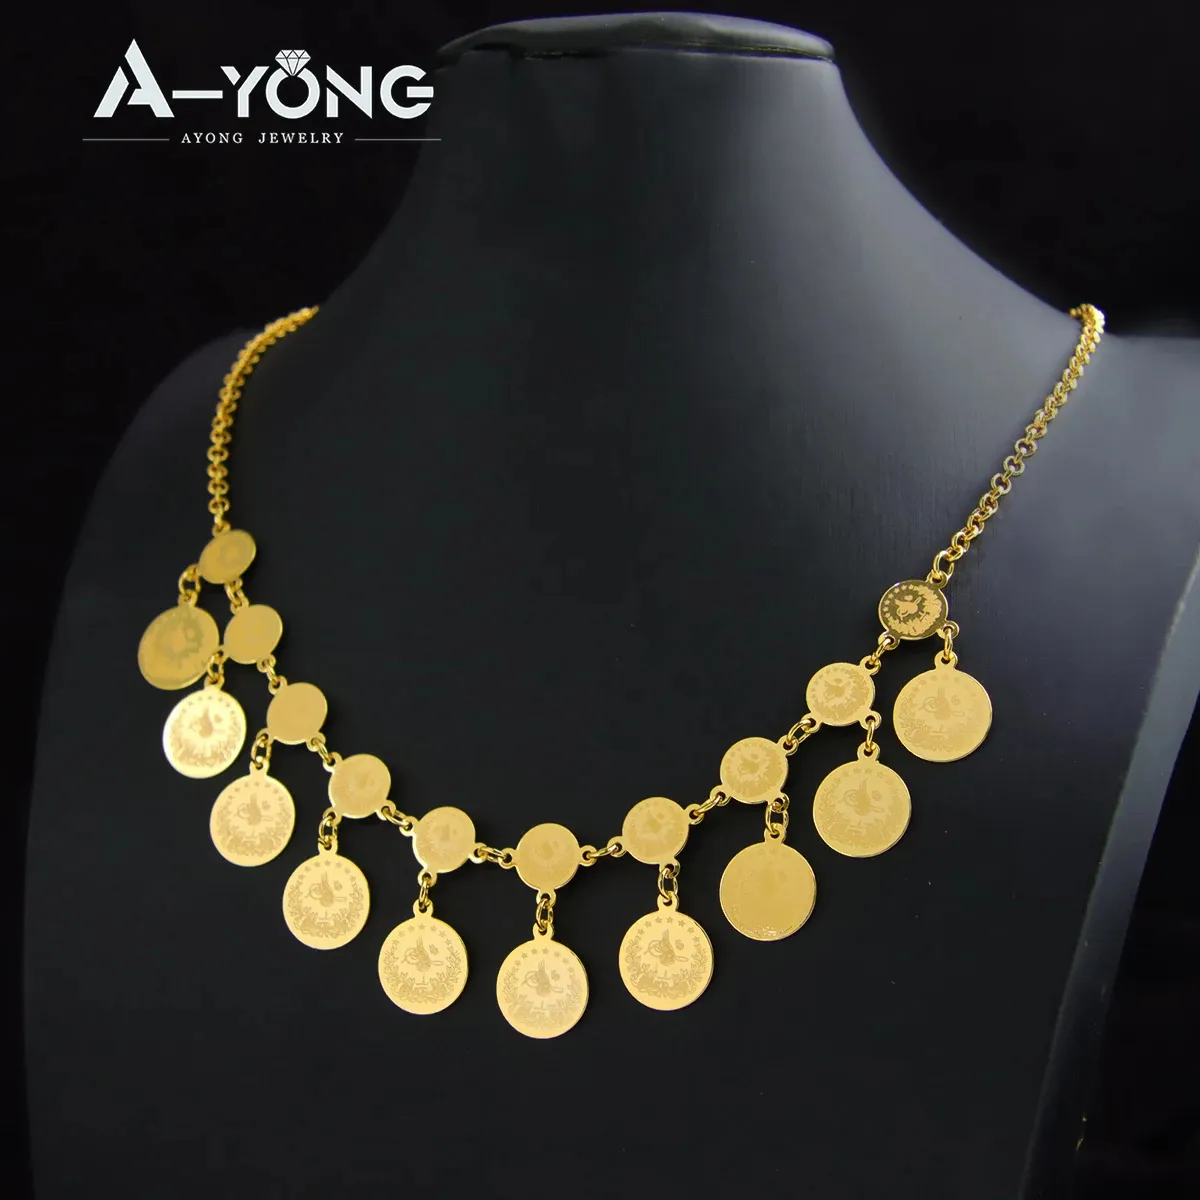 Hot Selling Luxury Jewelry 18K Gold Plated Turkish Coin Necklace Fashion Dubai Accessories Arab Wedding Women Necklace Wholesale